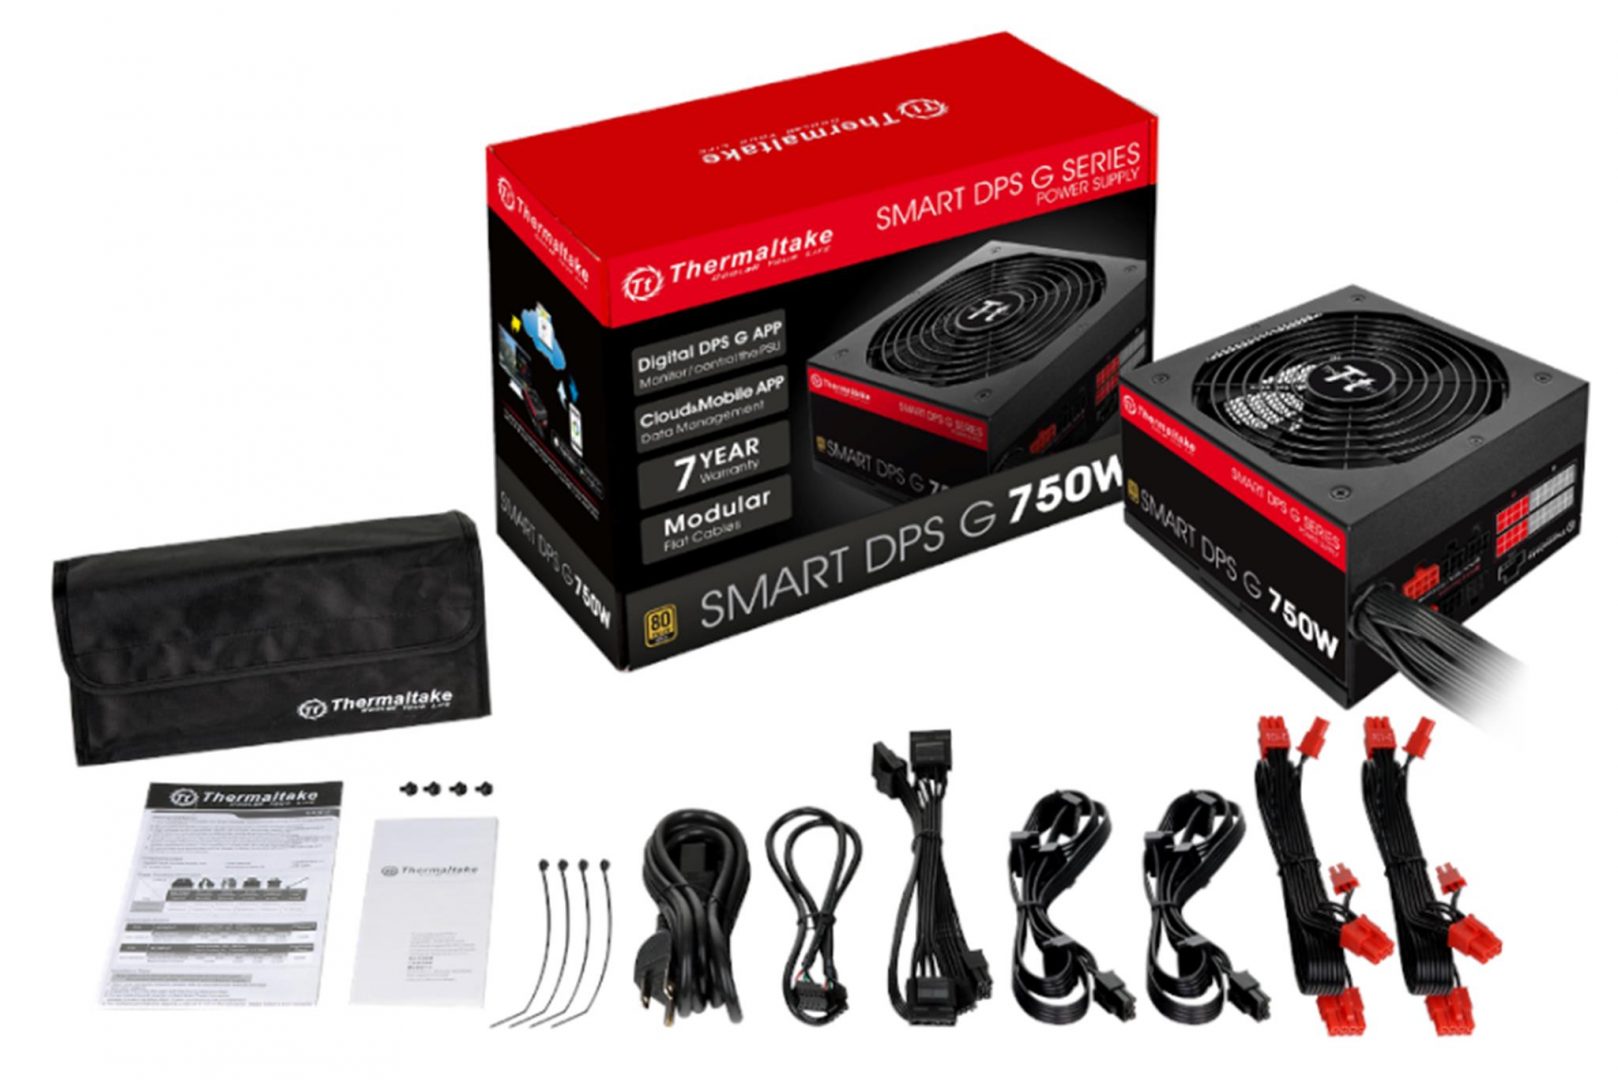 Thermaltake Smart DPS G Gold and Bronze Digital Power Supply Series